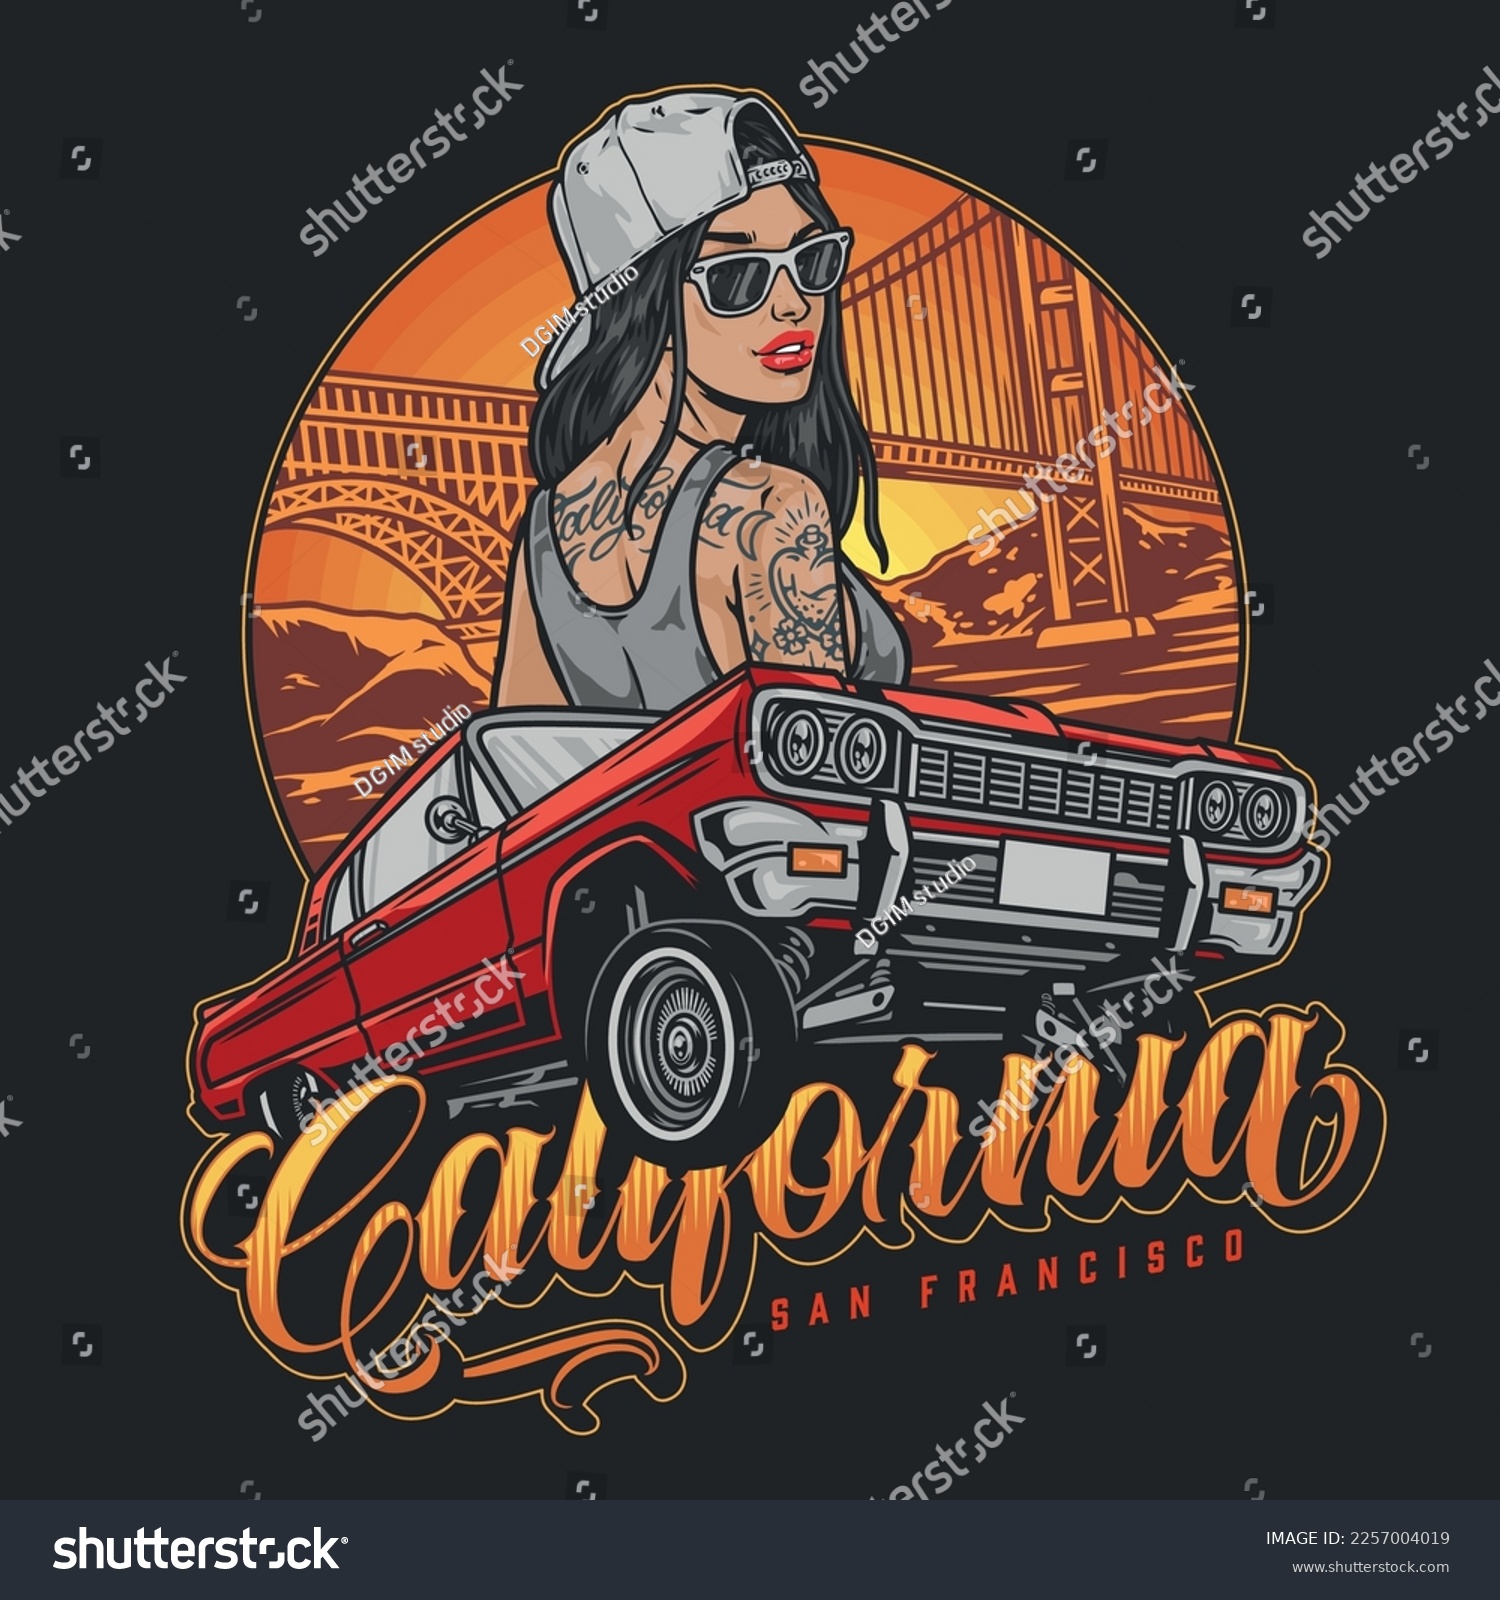 SVG of Daring woman lowrider colorful flyer with cool California car and tattooed woman near golden gate bridge vector illustration svg